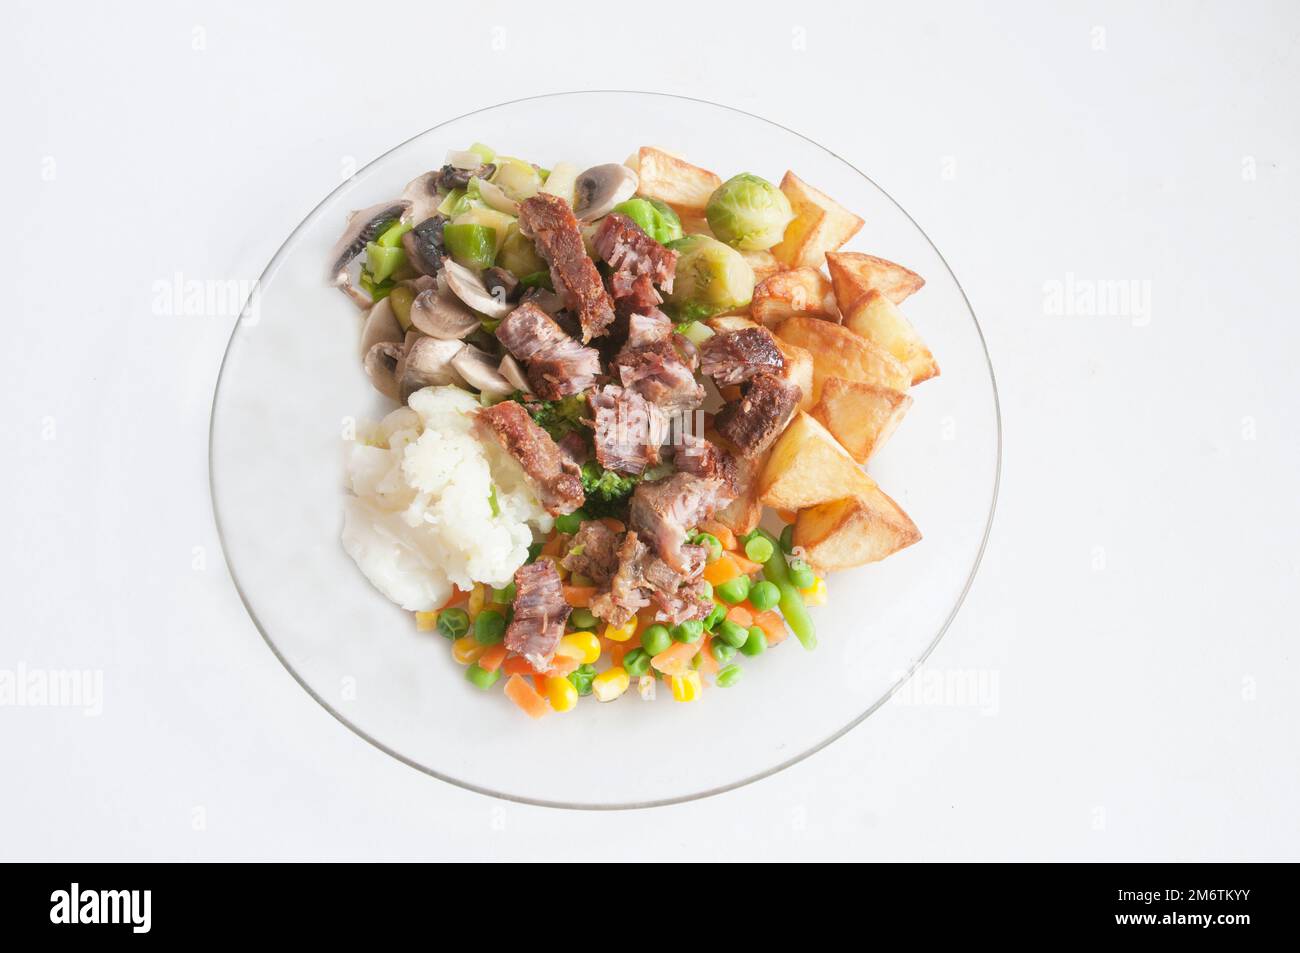 Cooked meal on a glass dinner plate a meat and vegetable meal of Pork & Crackling Cauliflower Brussel Sprouts Broccoli Mushrooms and Roast Potatoes Stock Photo